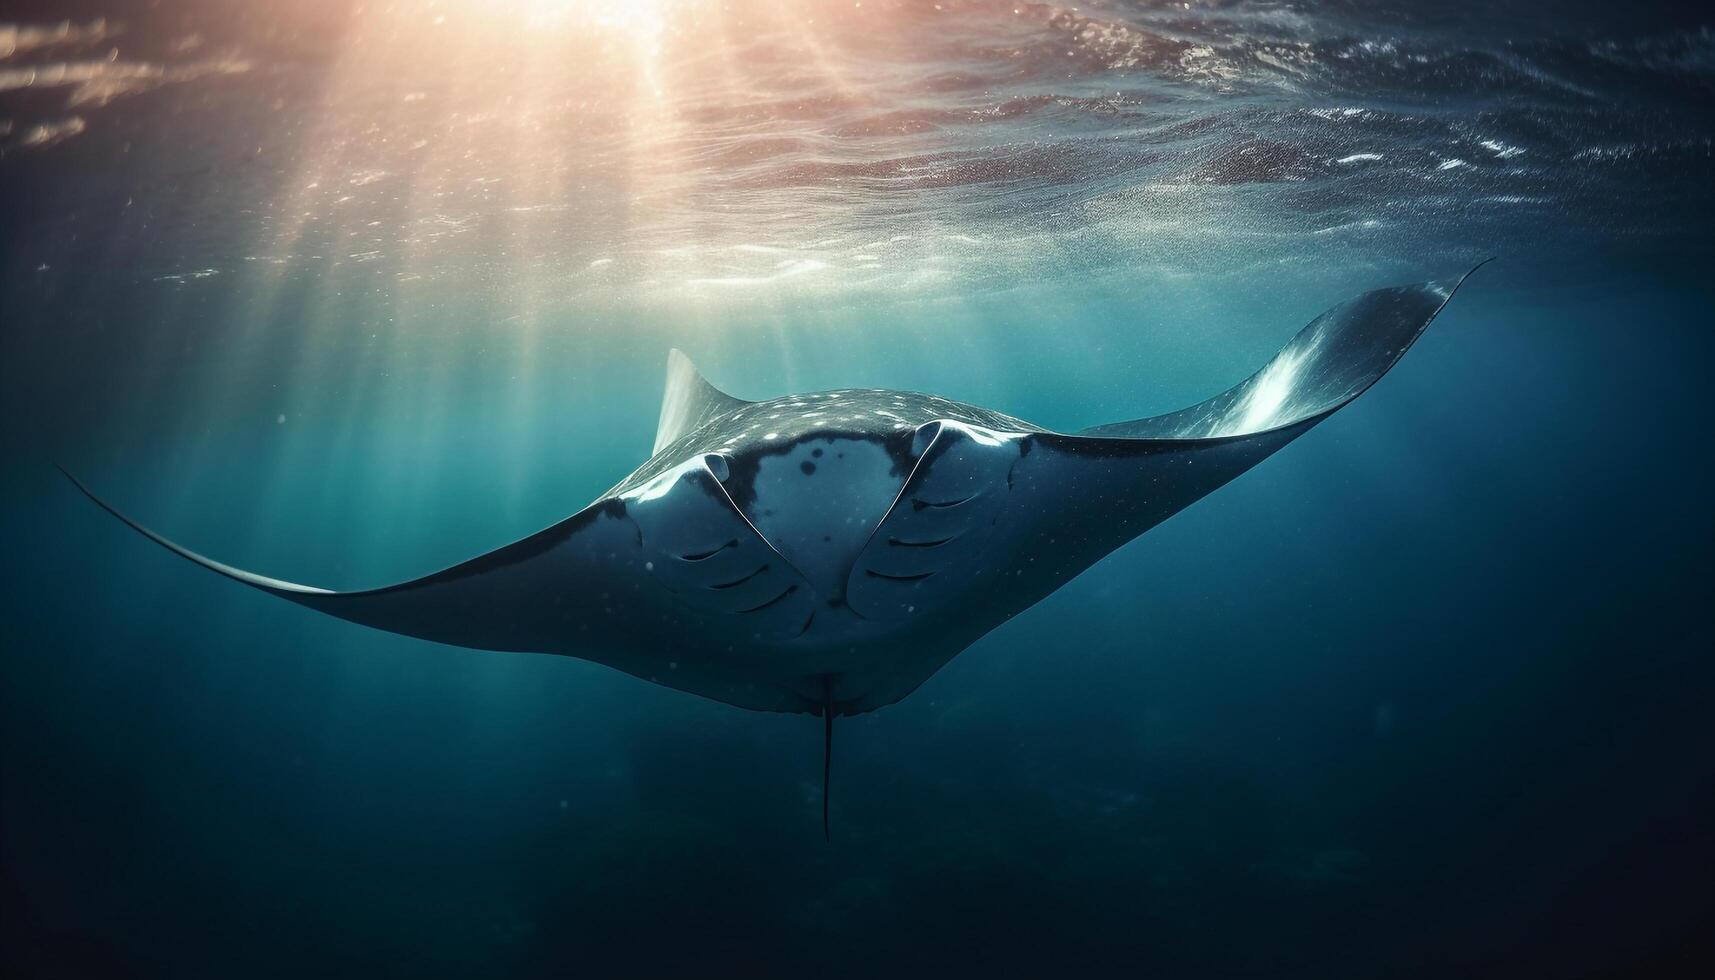 Majestic manta ray swimming below, a natural beauty in motion generated by AI photo